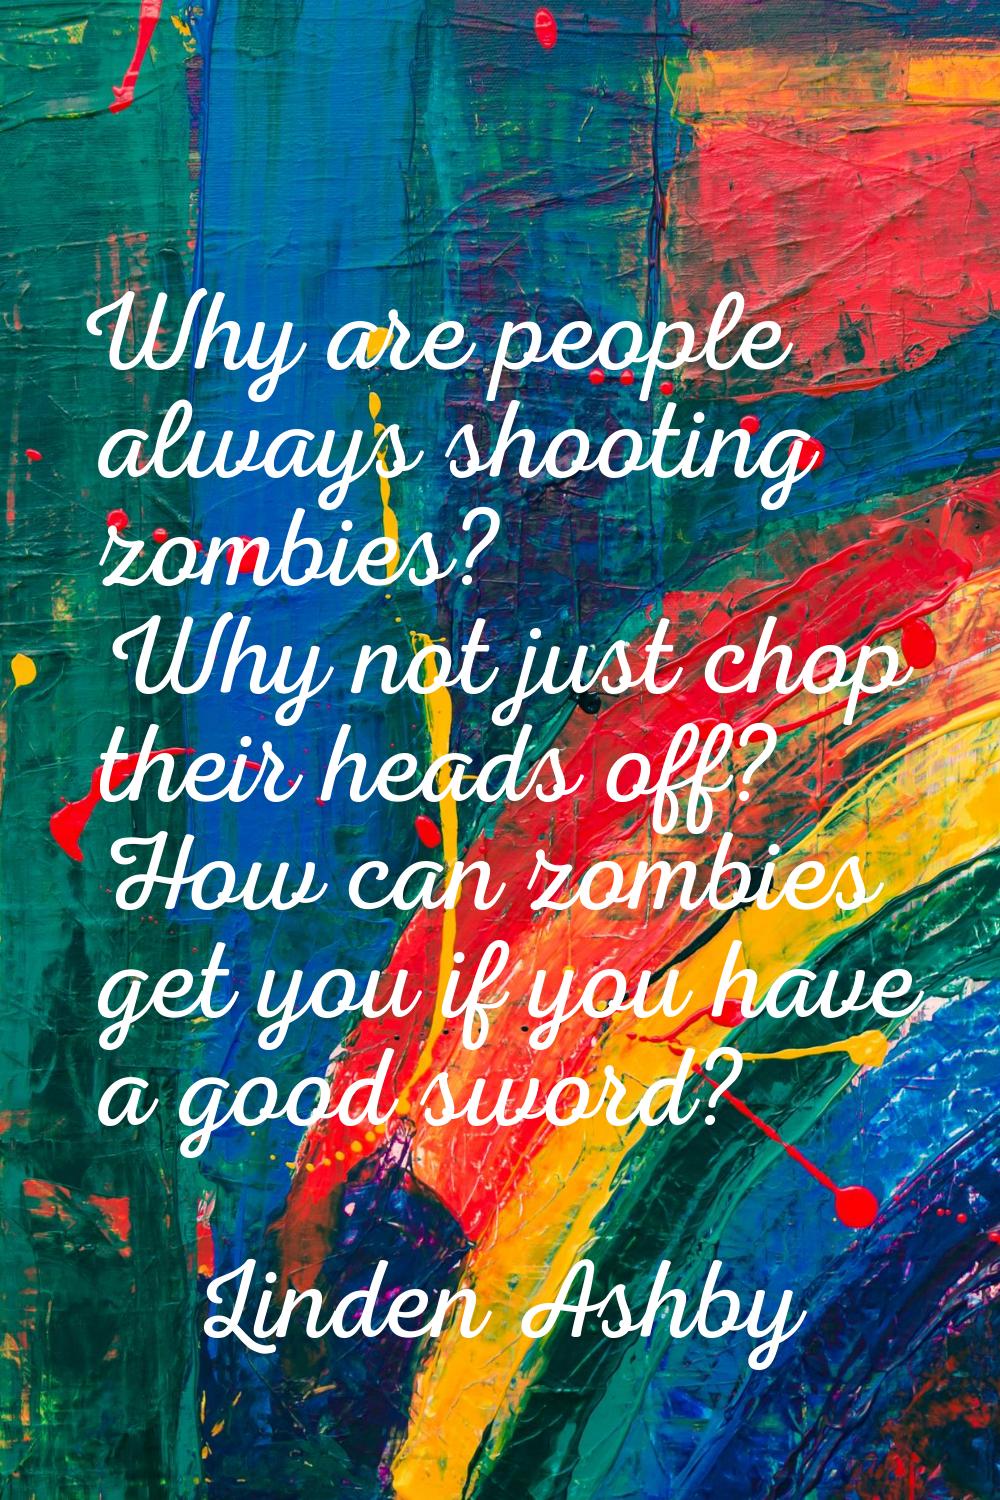 Why are people always shooting zombies? Why not just chop their heads off? How can zombies get you 